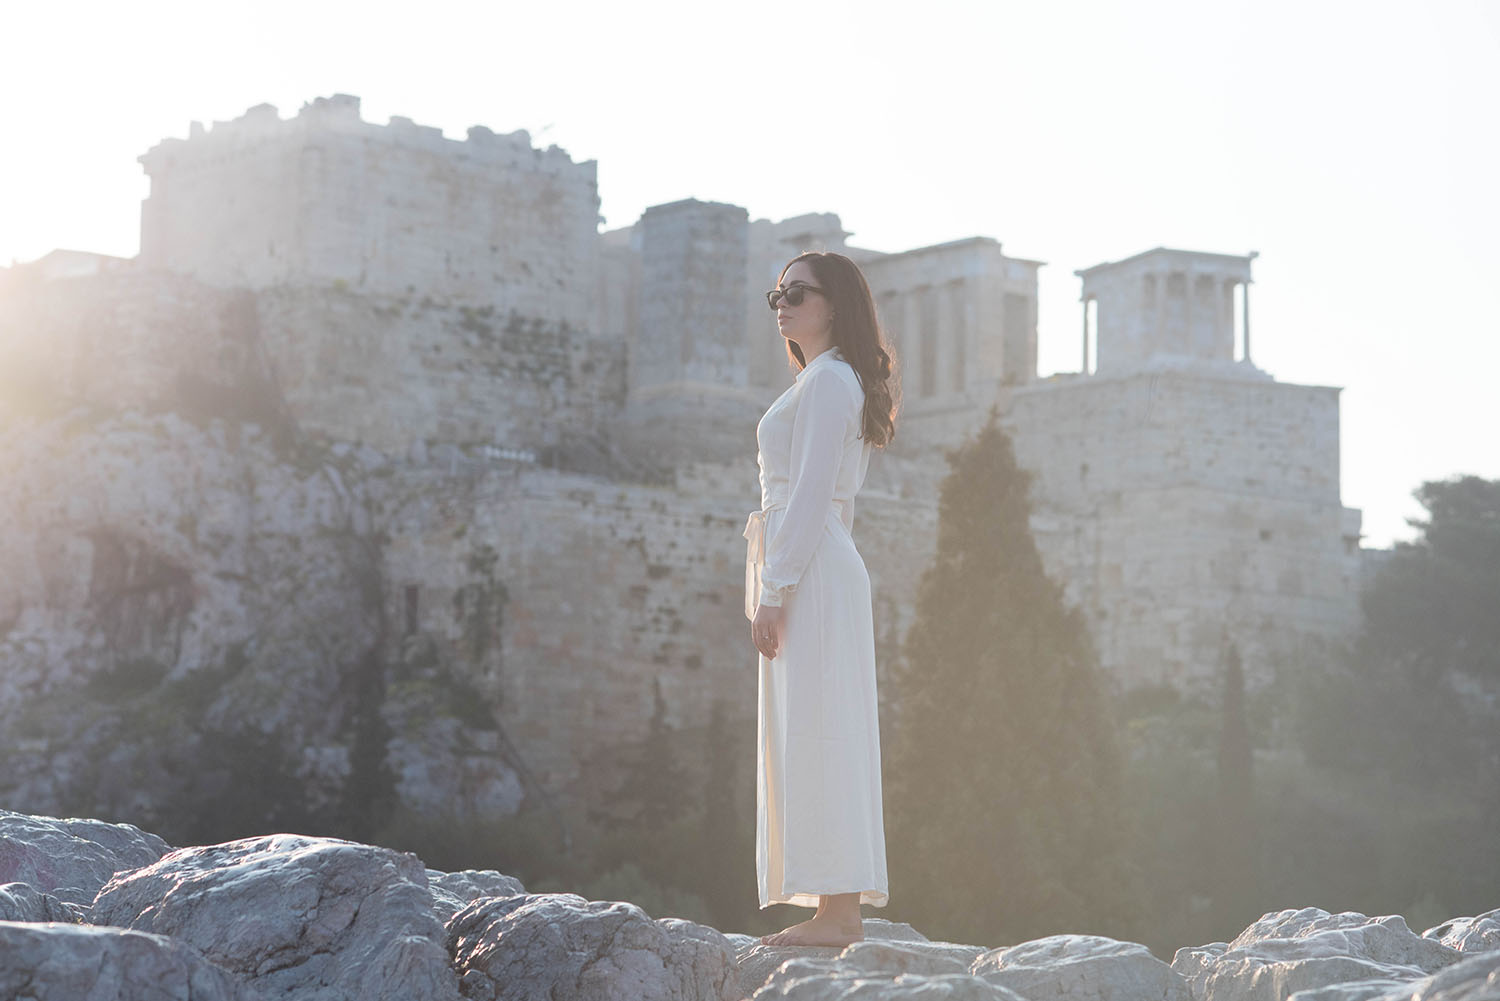 Fashion blogger Cee Fardoe of Coco & Vera stands near Acropolis Hill in Athens, Greece wearing a white Lovers + Friends dress and RayBan Wayfarer sunglasses